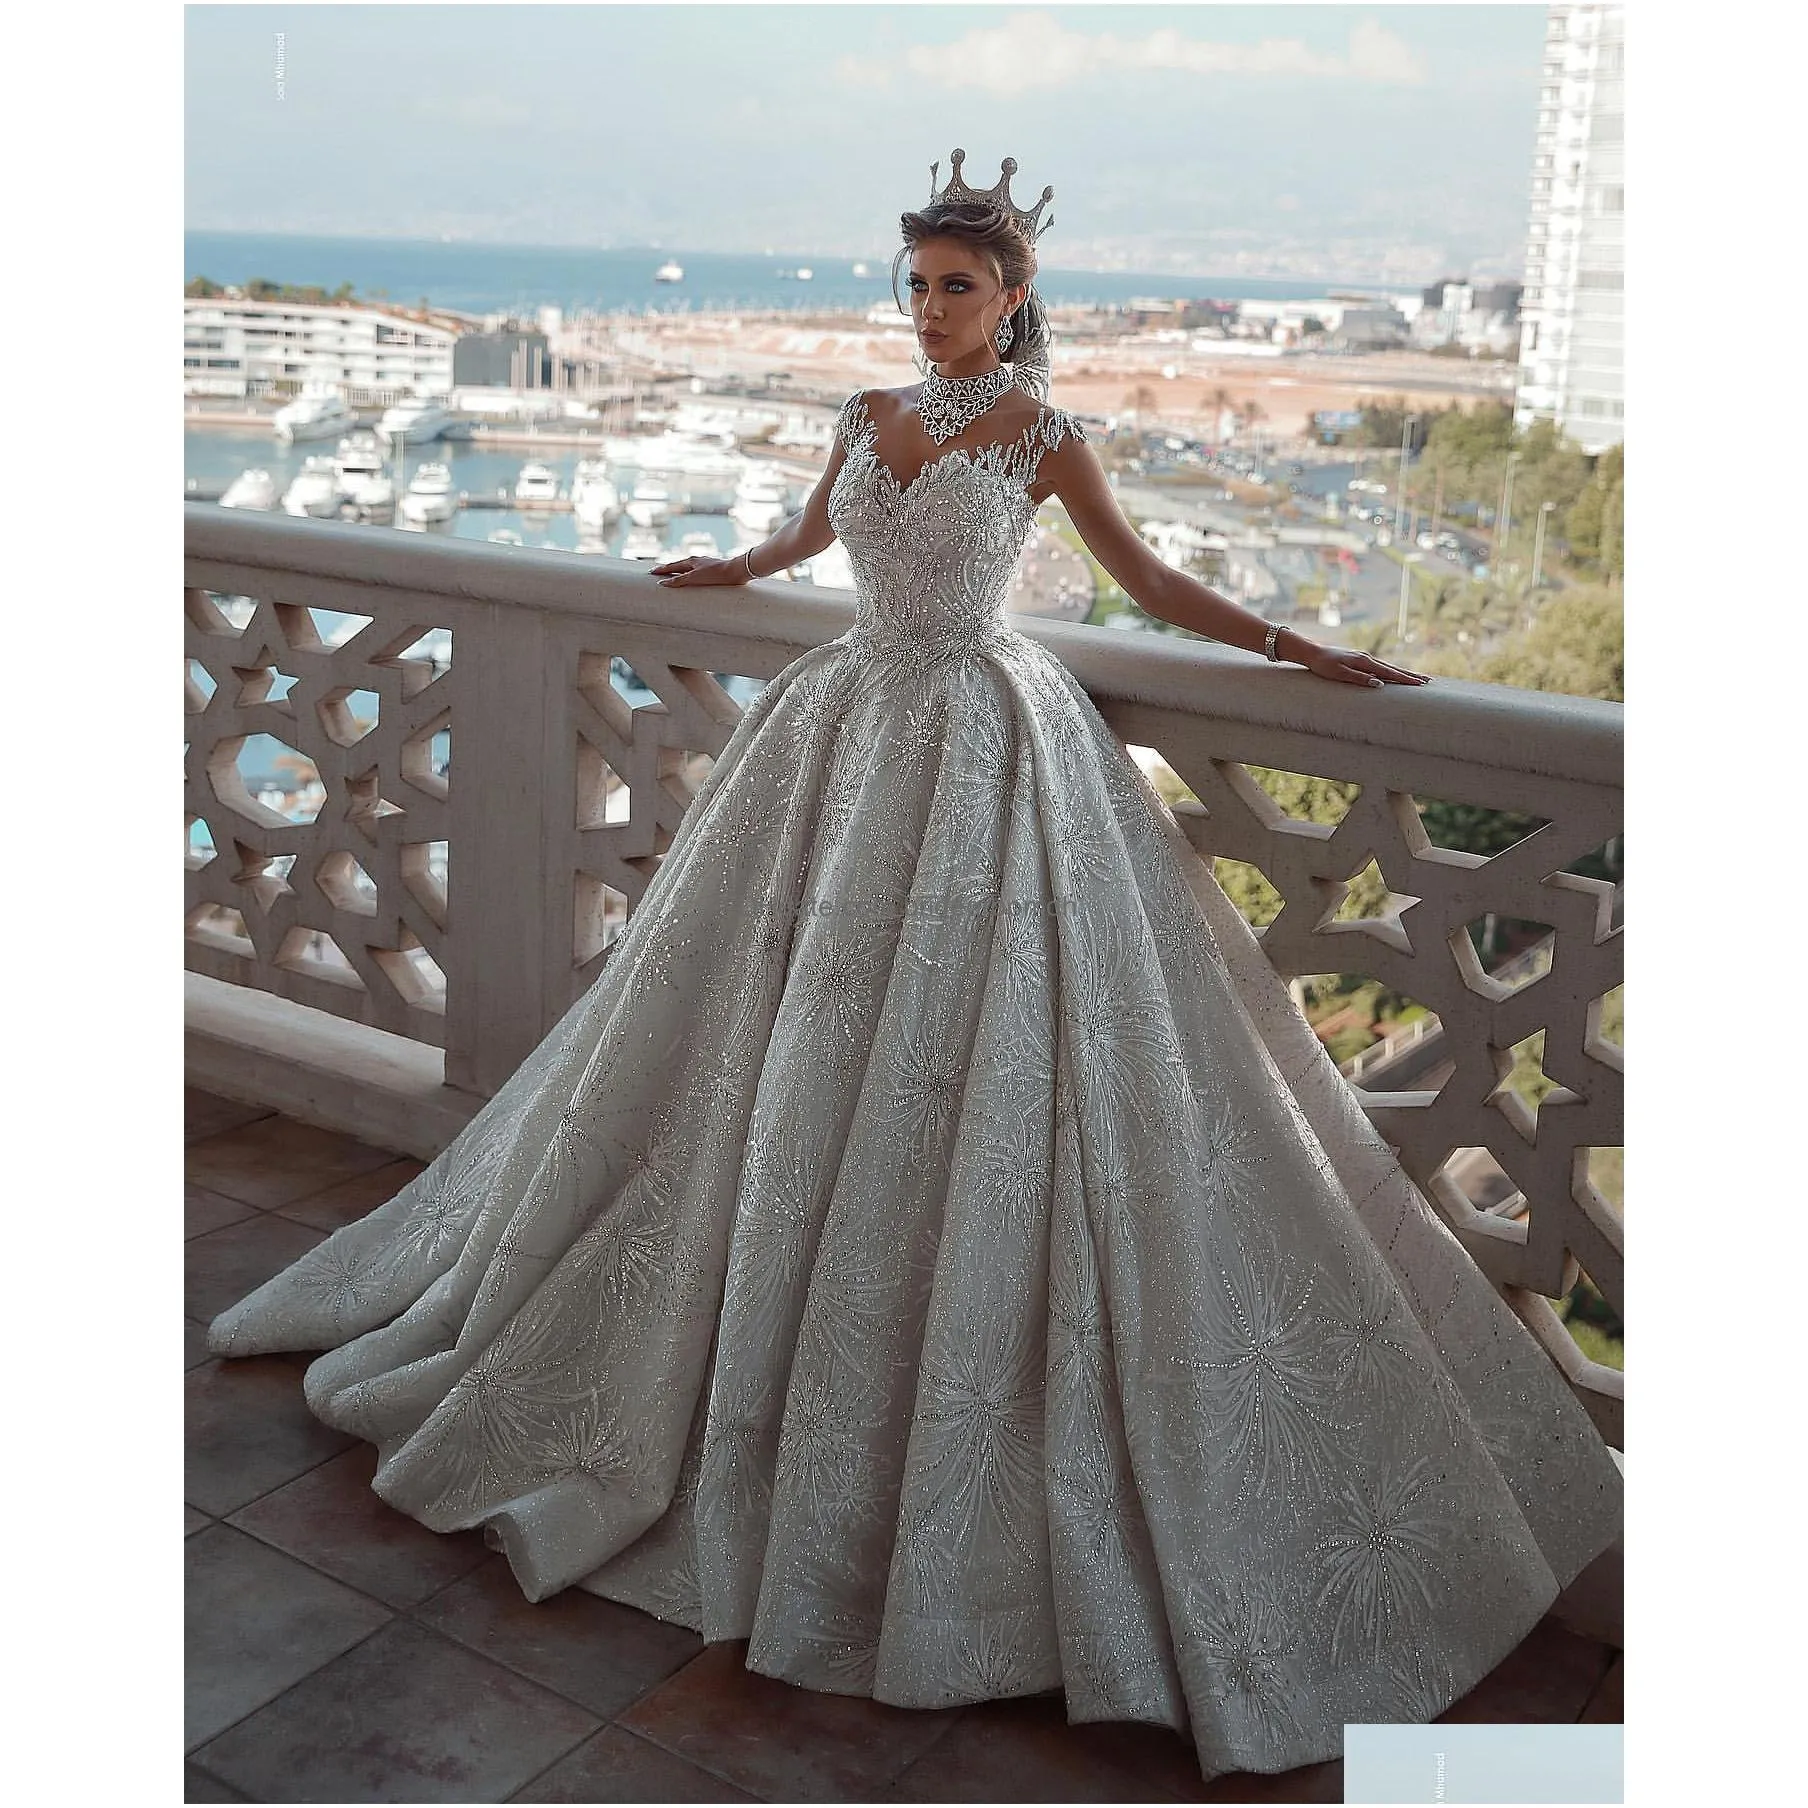 2019 arabic luxurious sparkly sexy wedding dresses sheer neck beaded lace bridal dresses long sleeves vintage wedding gowns zj115